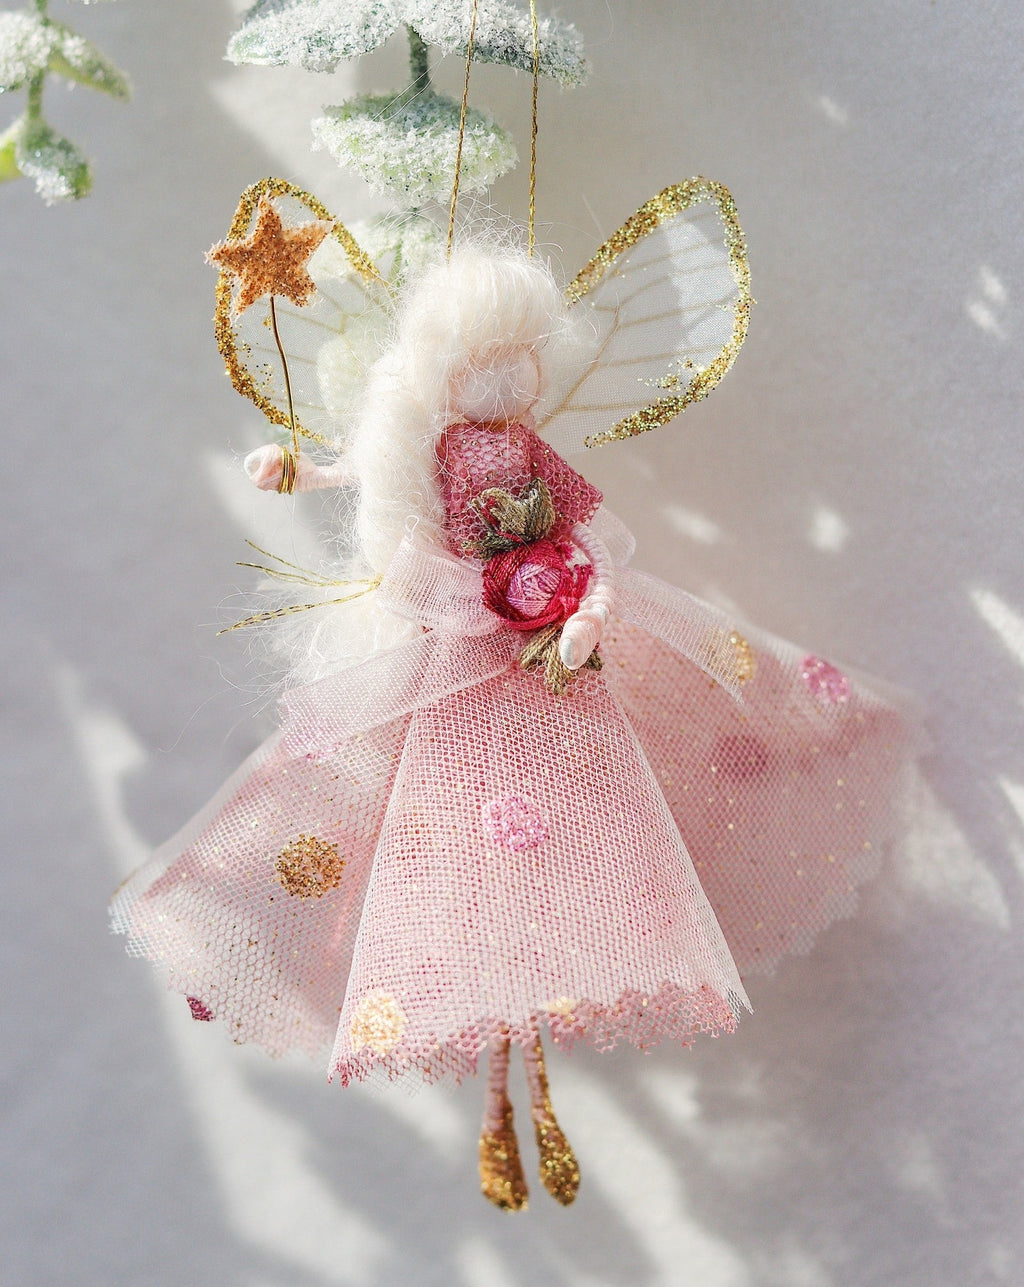 This little fairy is dressed in a pink glitter tulle with a spotted tulle overlay. She has sashed her gown at the waist with an Organza ribbon and a little pink embroidered rose trim. She has little shoes dipped in glitter and of course, her glittered wand to grant you your wishes!